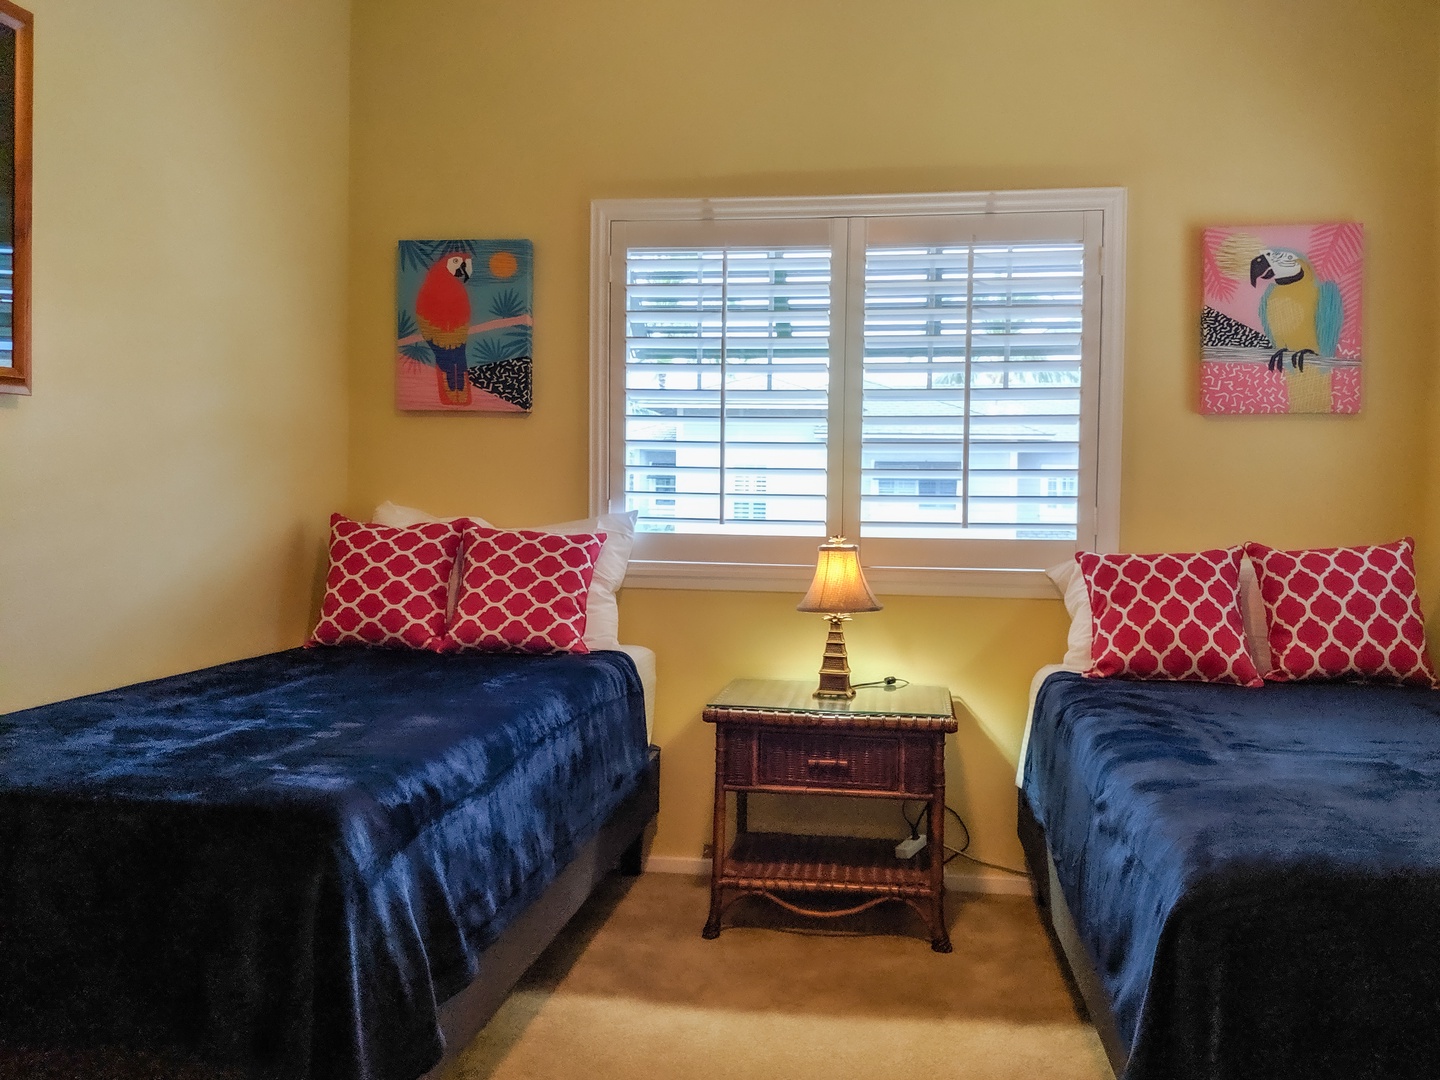 Kapolei Vacation Rentals, Coconut Plantation 1078-3 - The third guest bedroom with twin beds and colorful decor.